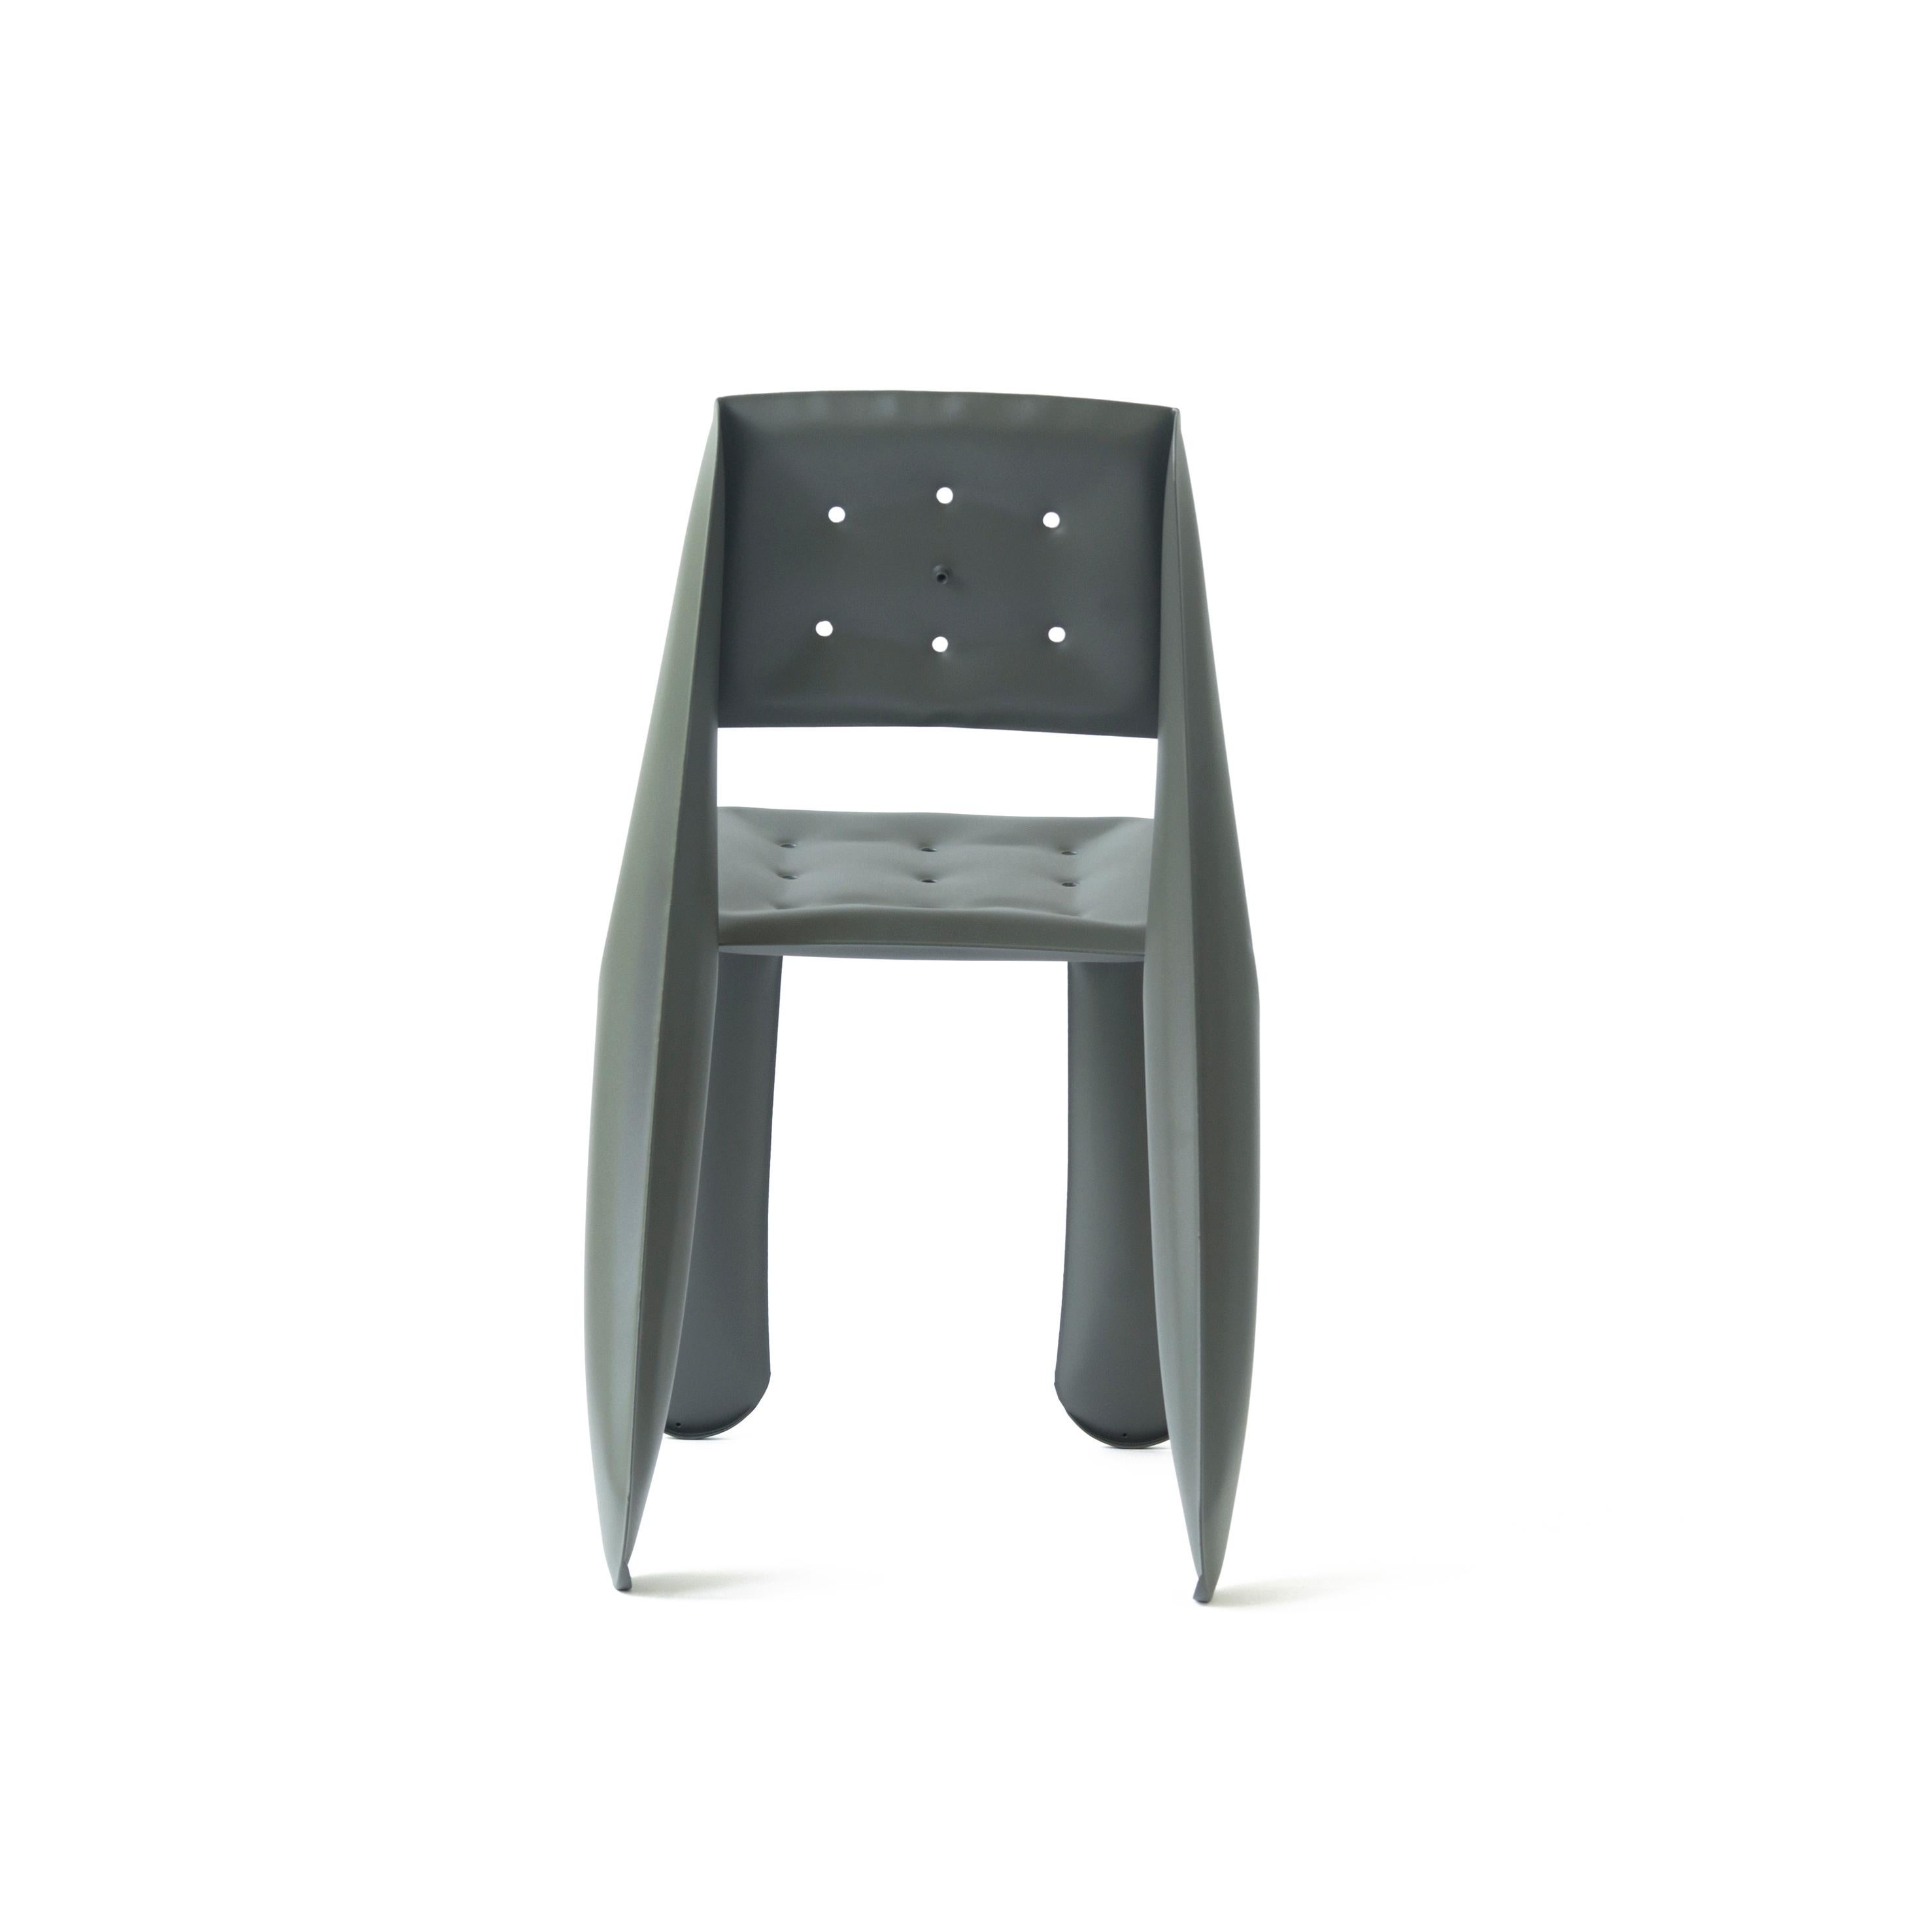 Umbra Grey Carbon Steel Chippensteel 0.5 Sculptural Chair by Zieta In New Condition For Sale In Geneve, CH